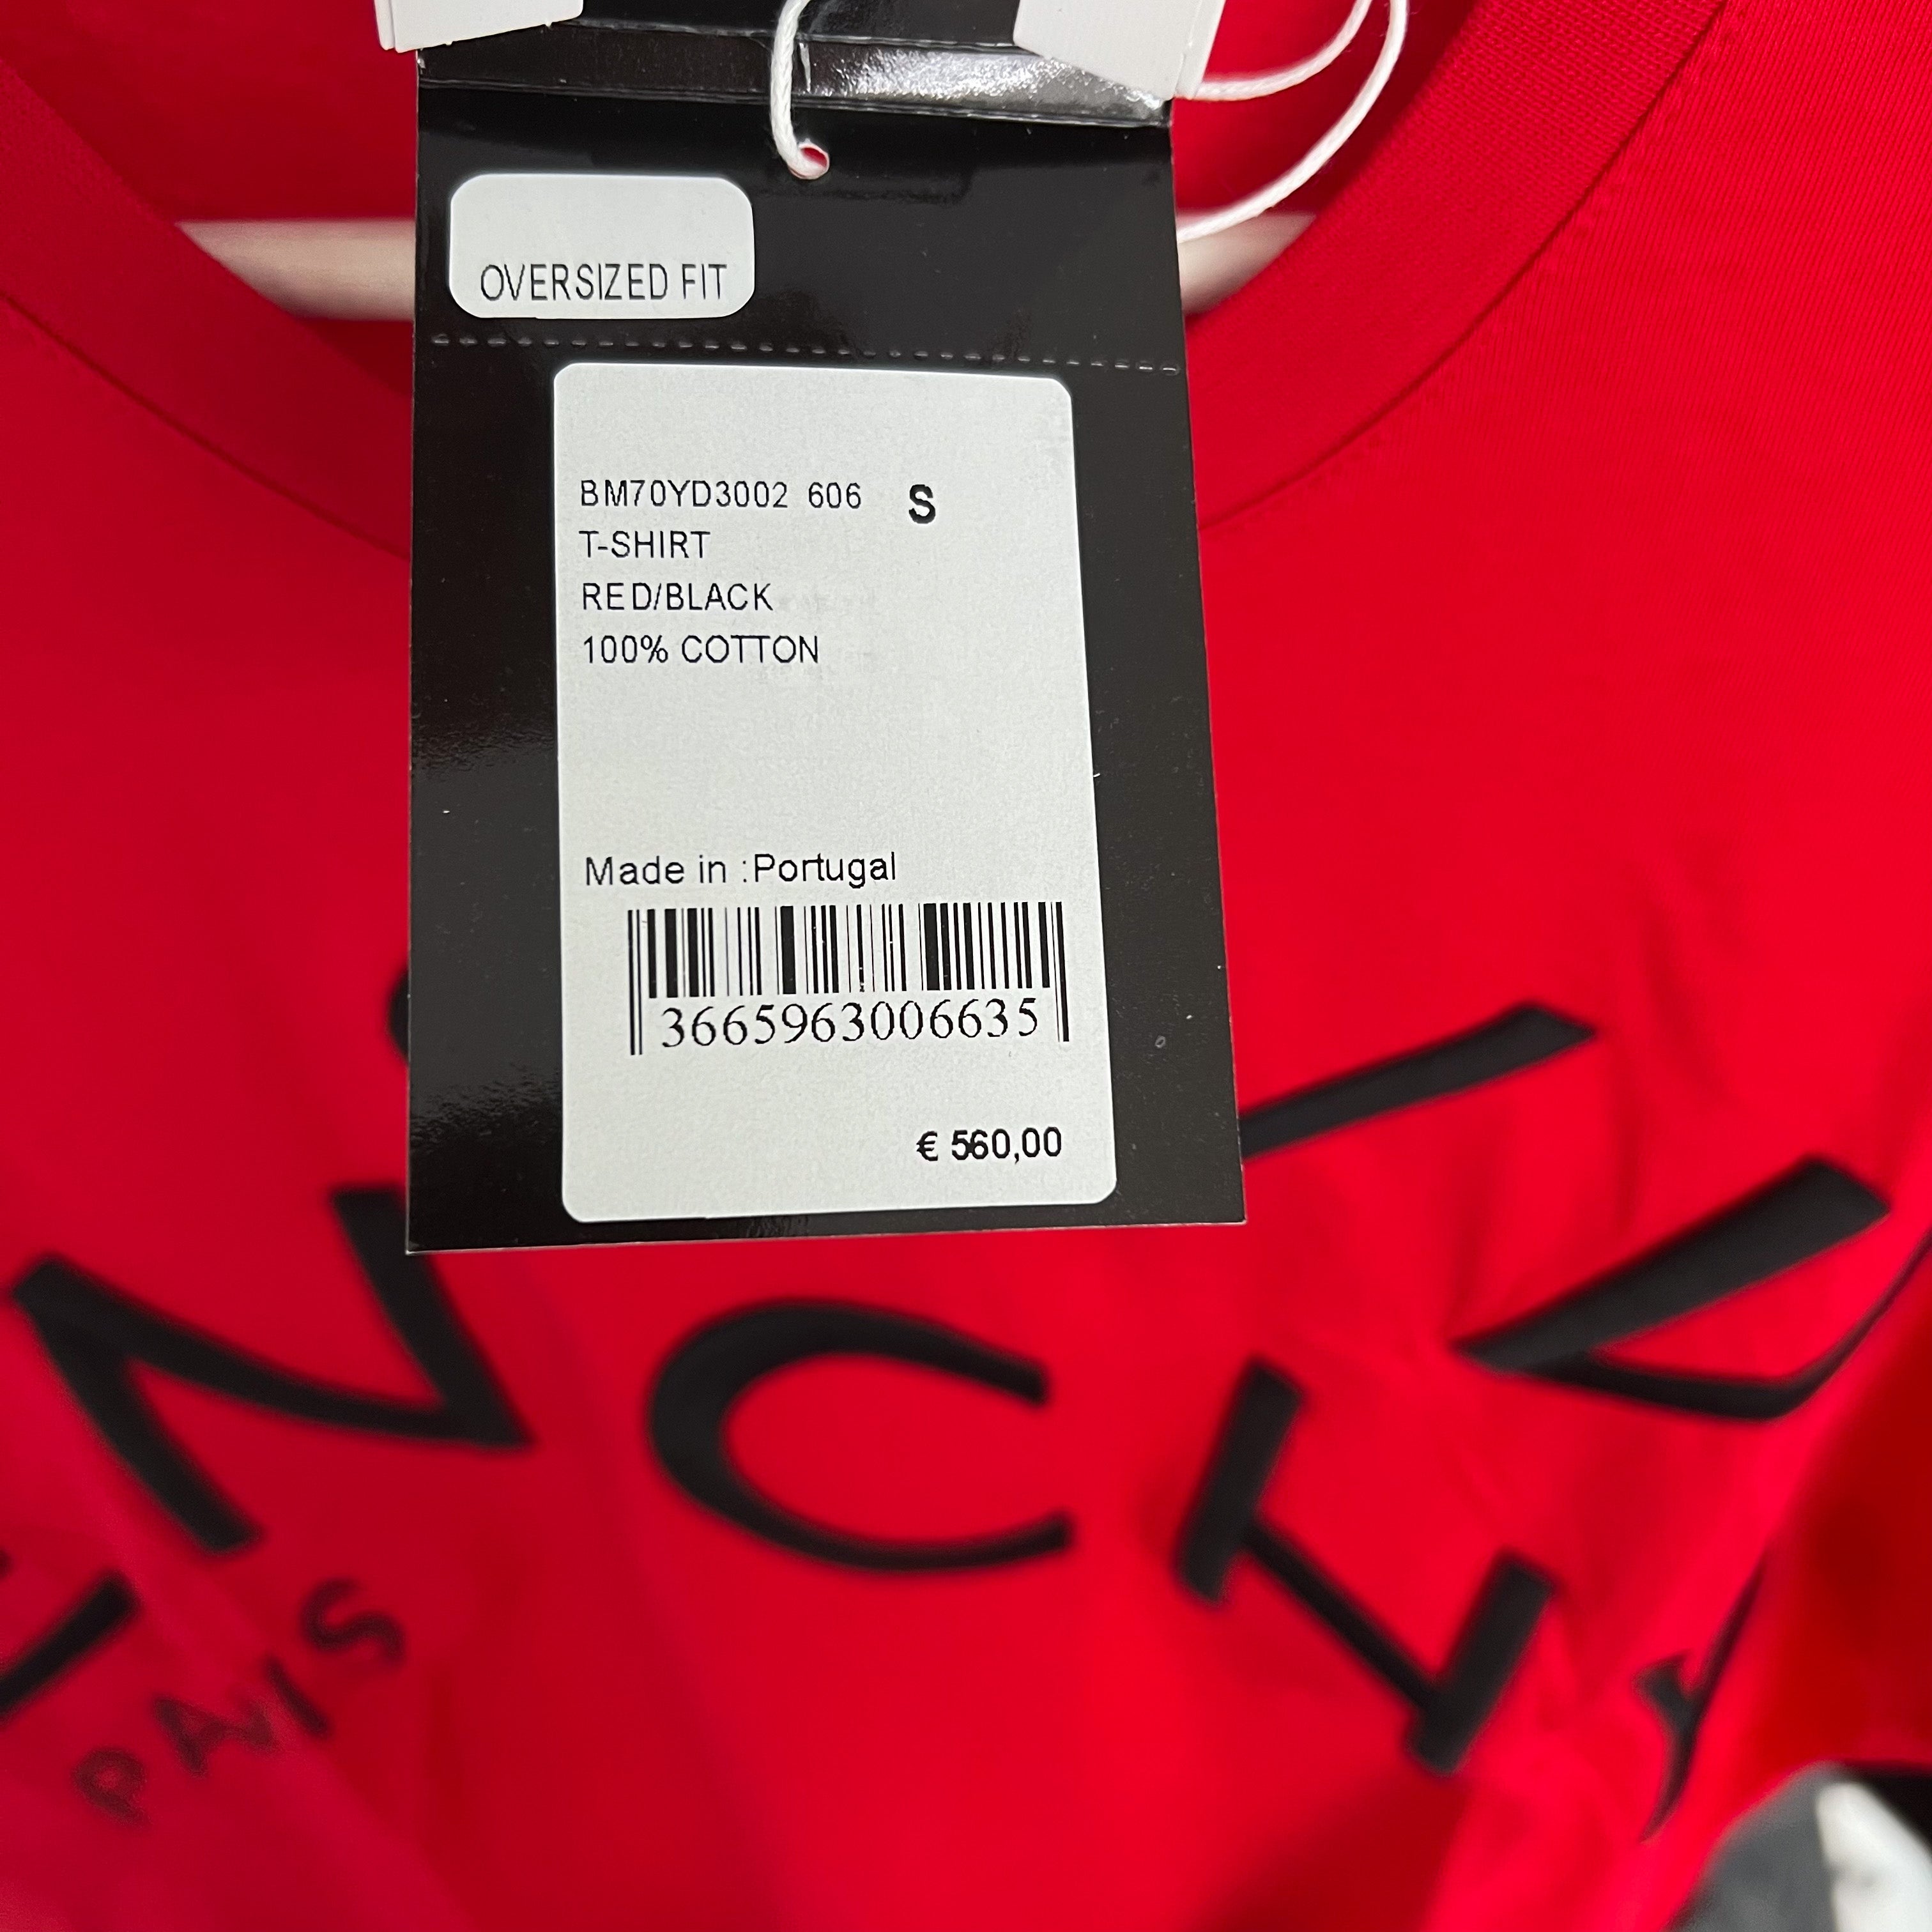 Givenchy Refracted Logo Tee - Red